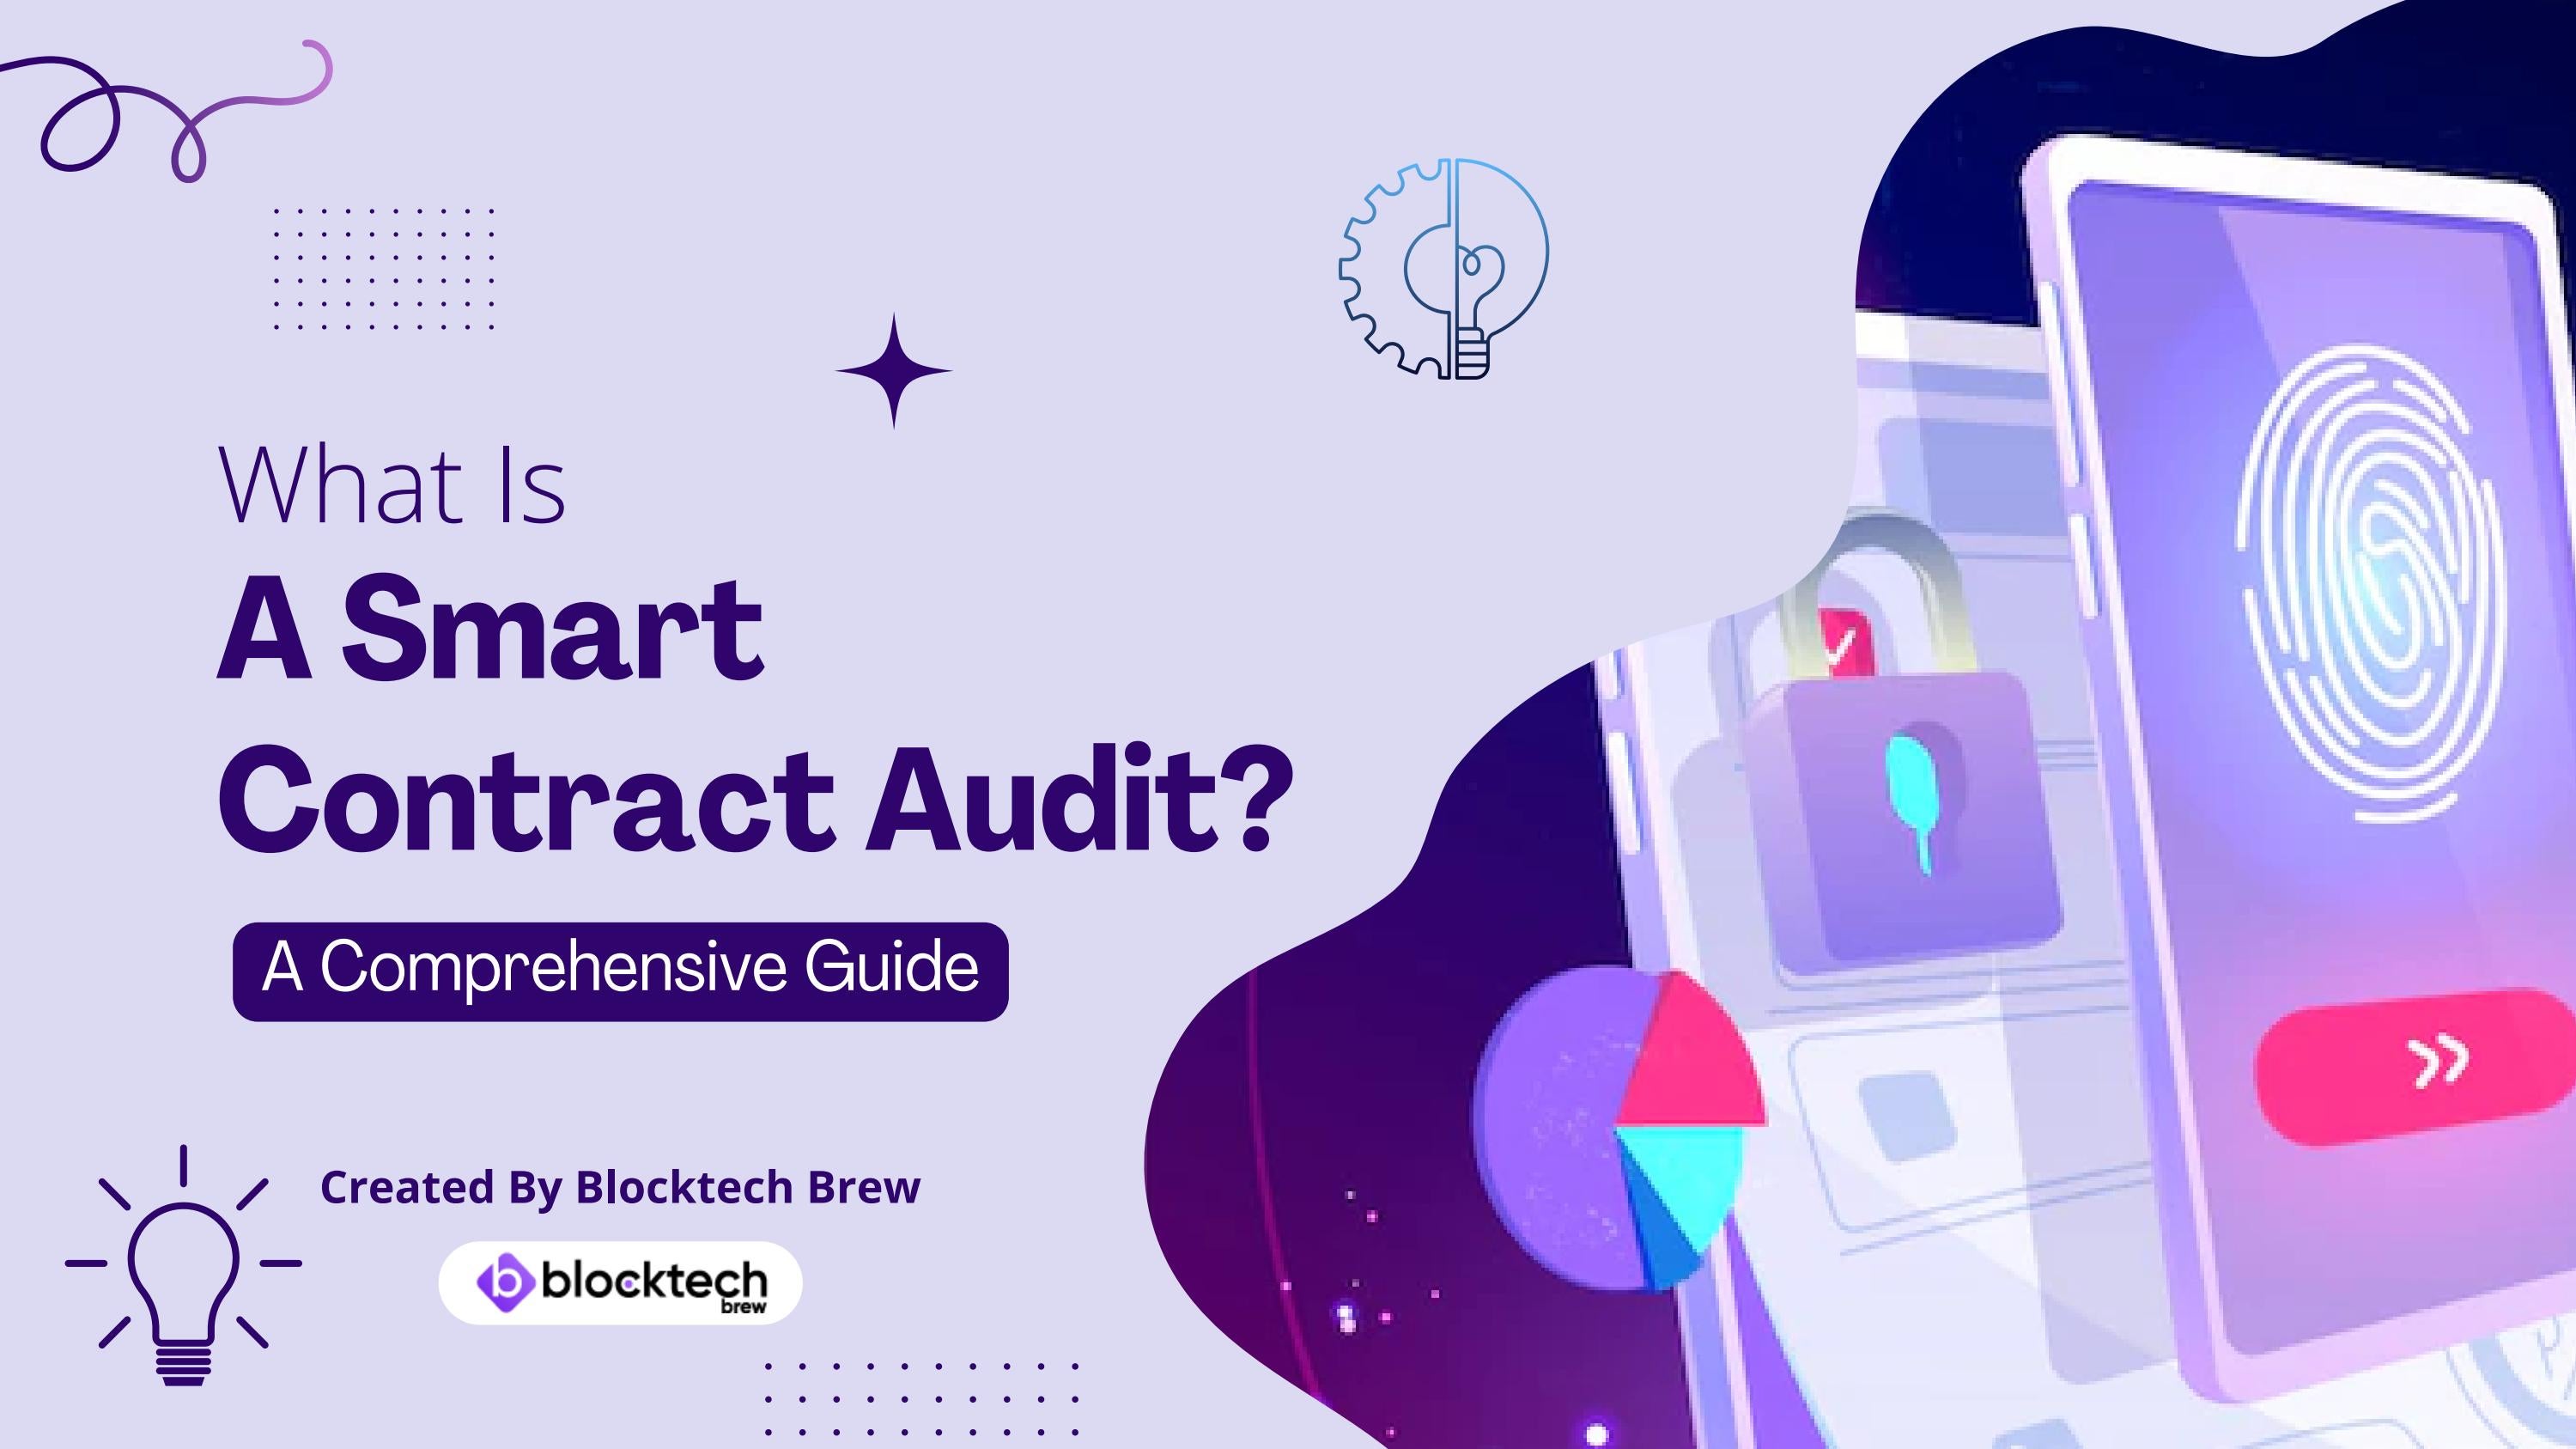 What Is A Smart Contract Audit?